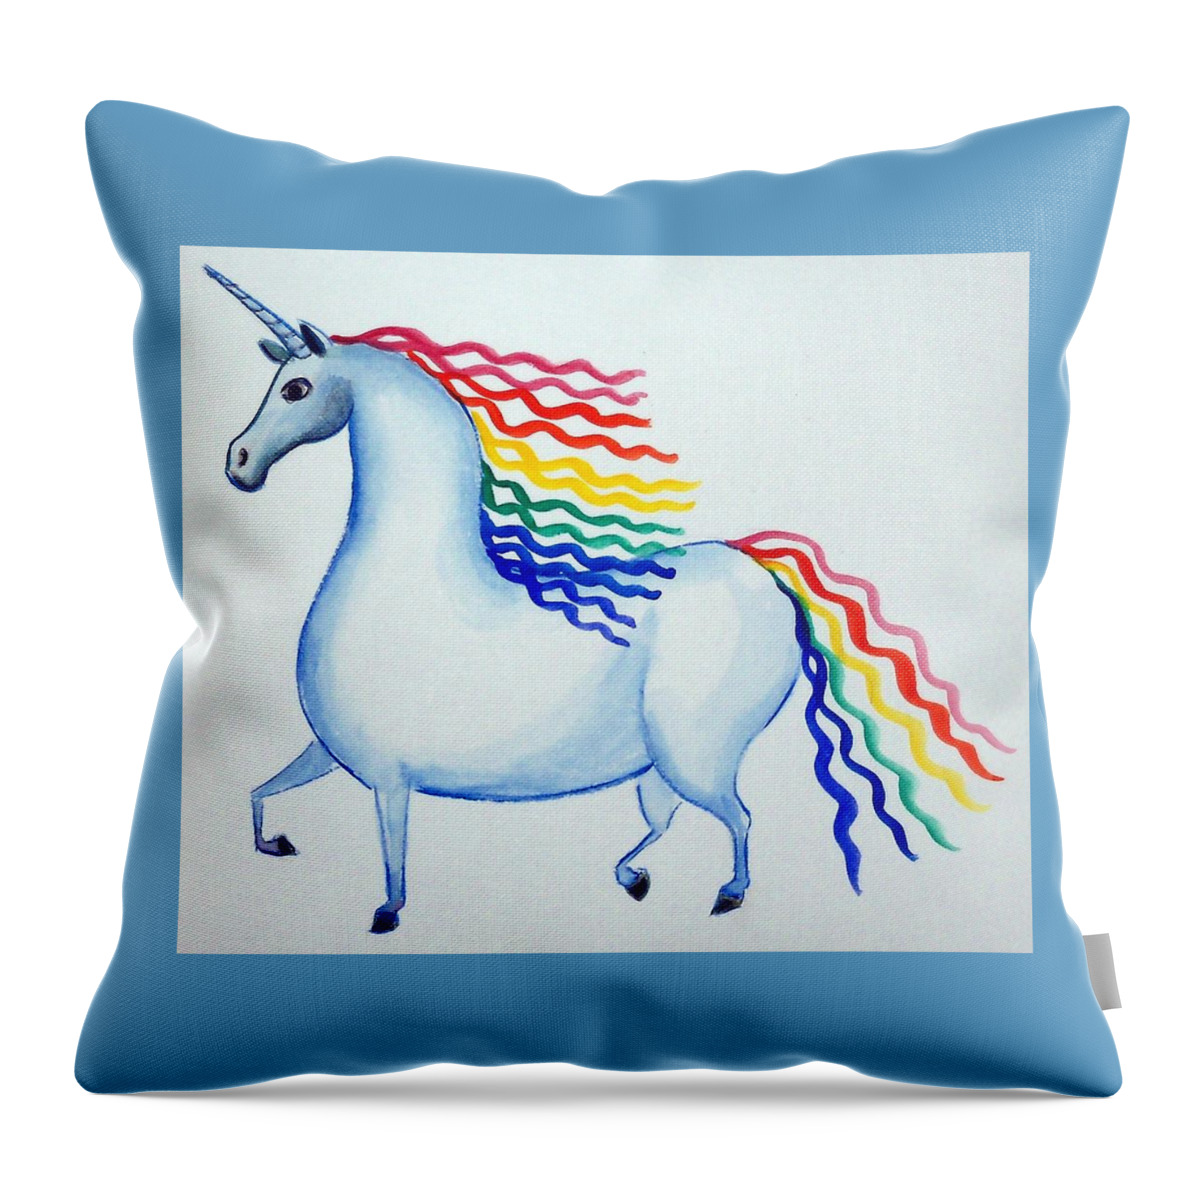 Unicorn Throw Pillow featuring the painting Rainbow Unicorn by Debbie Criswell